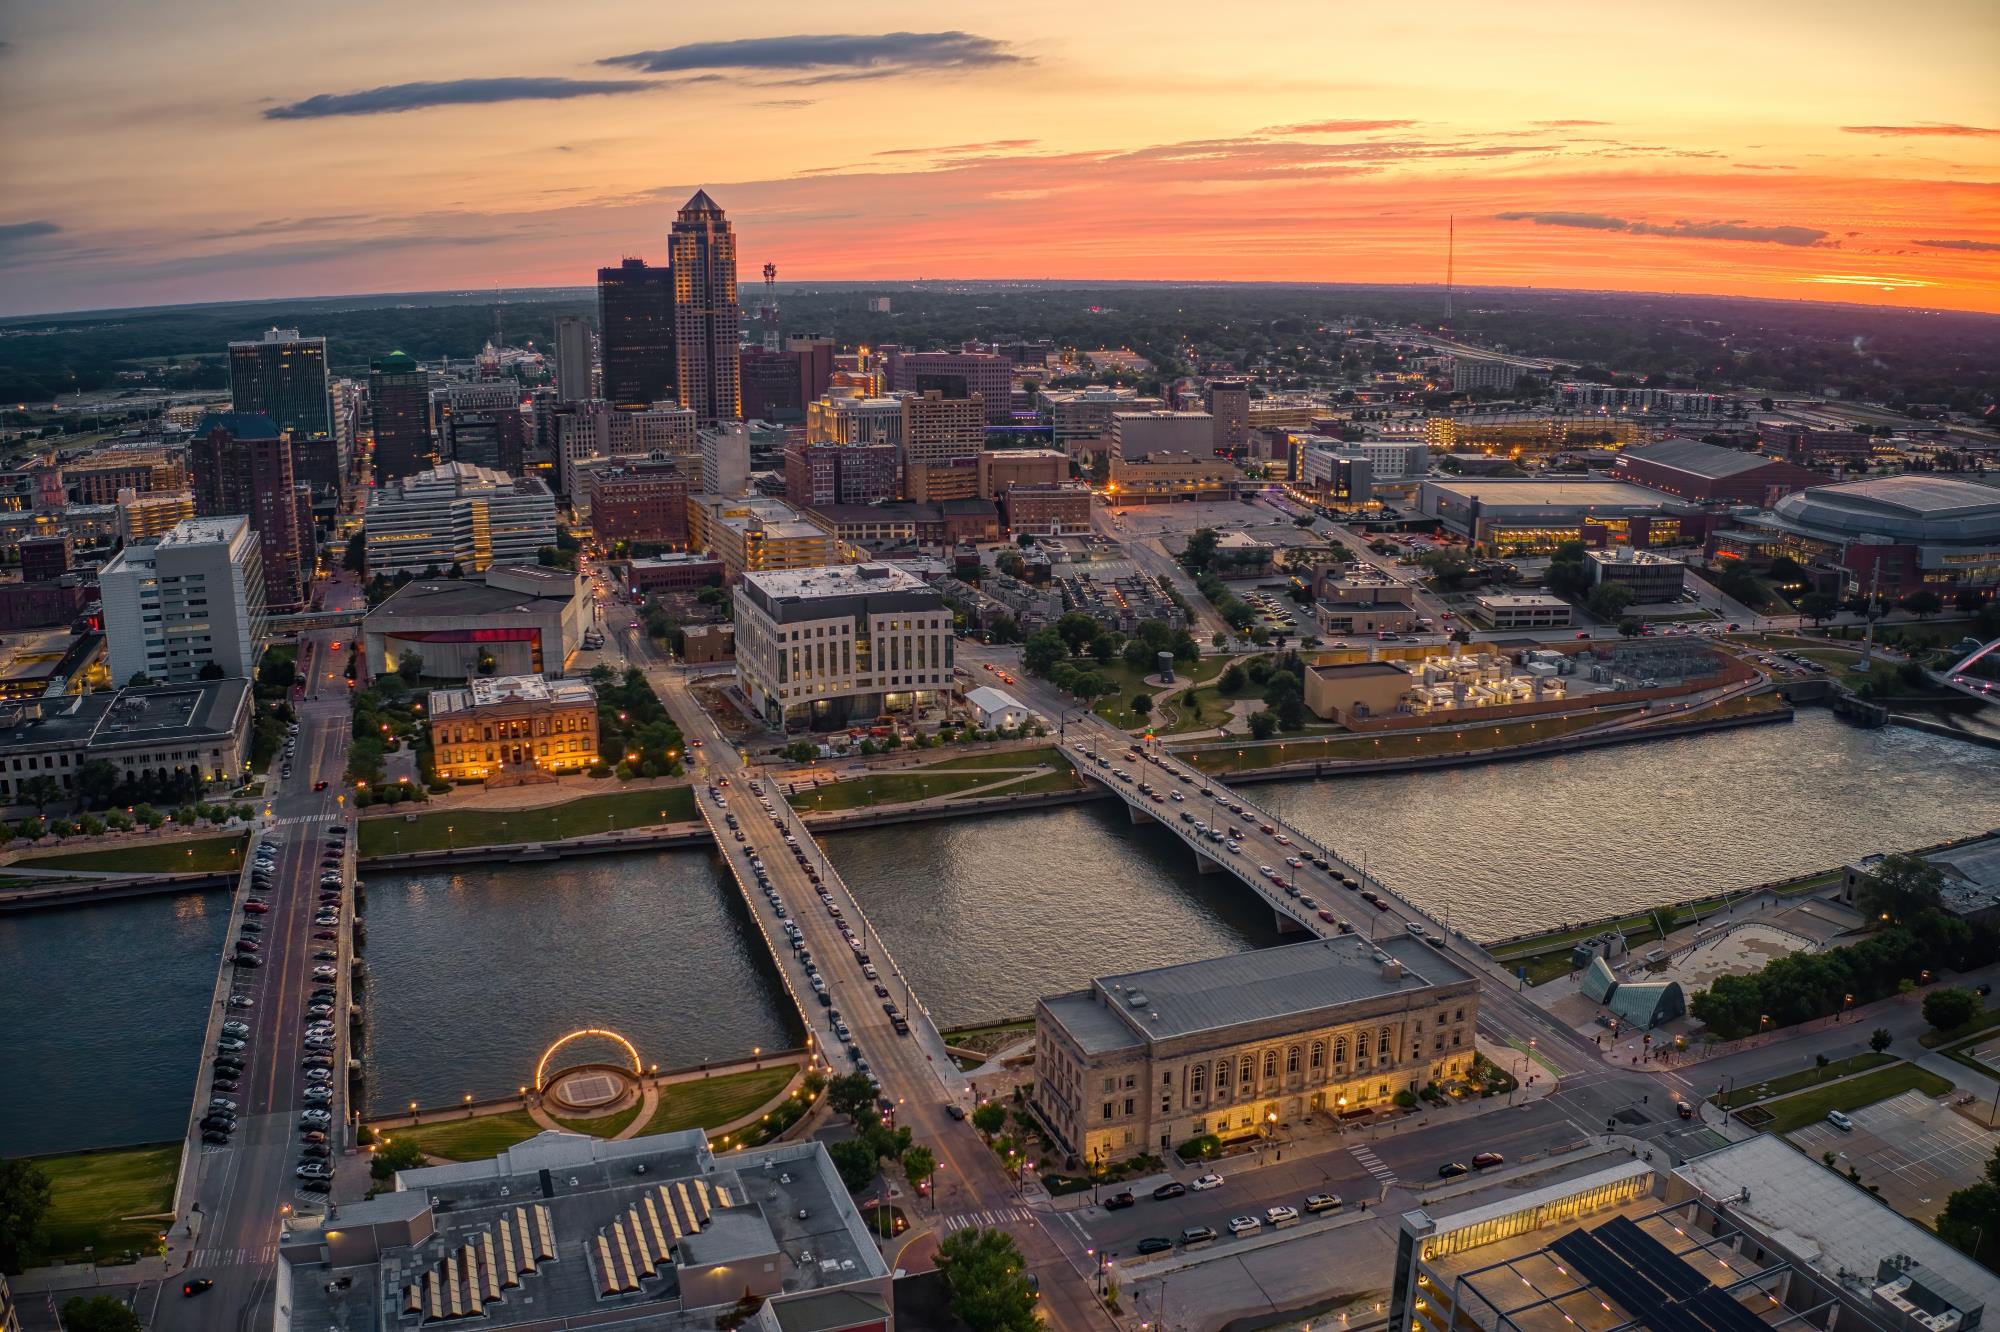 Aerial view of the Des Moines, IA skyline at sunset